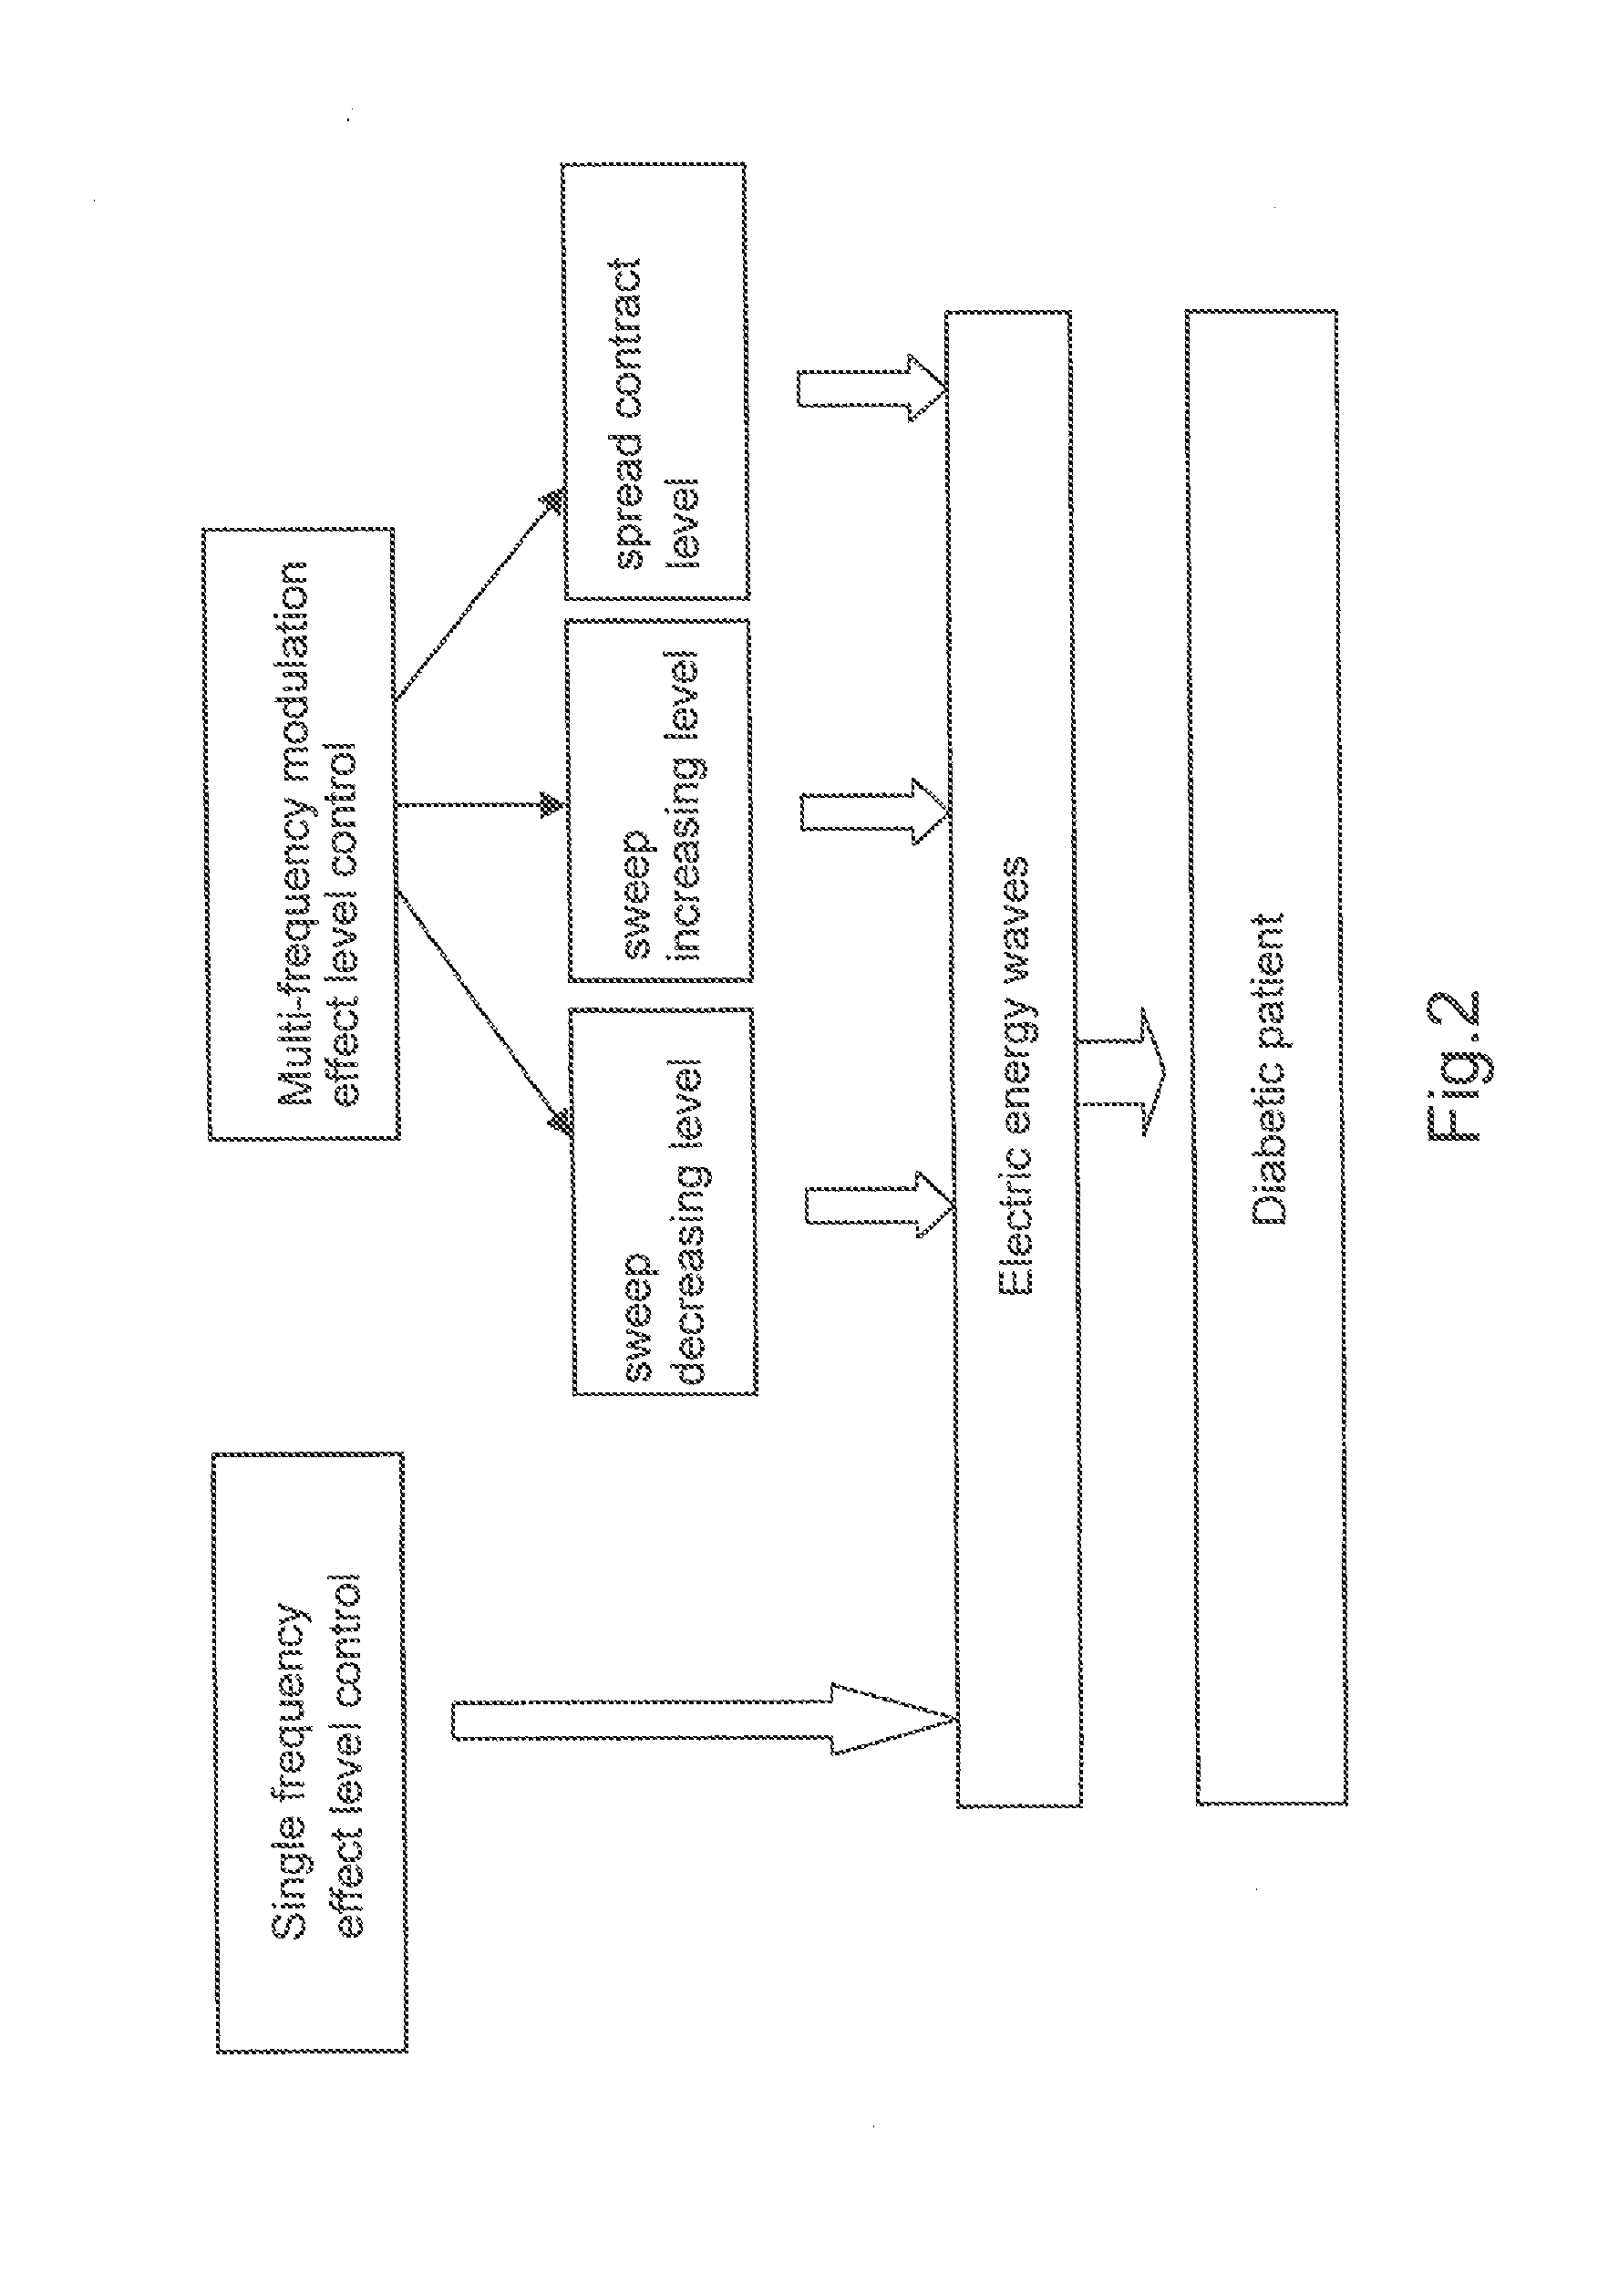 Diabetes glucagon mitigation system and method with an electrical energy wave generator